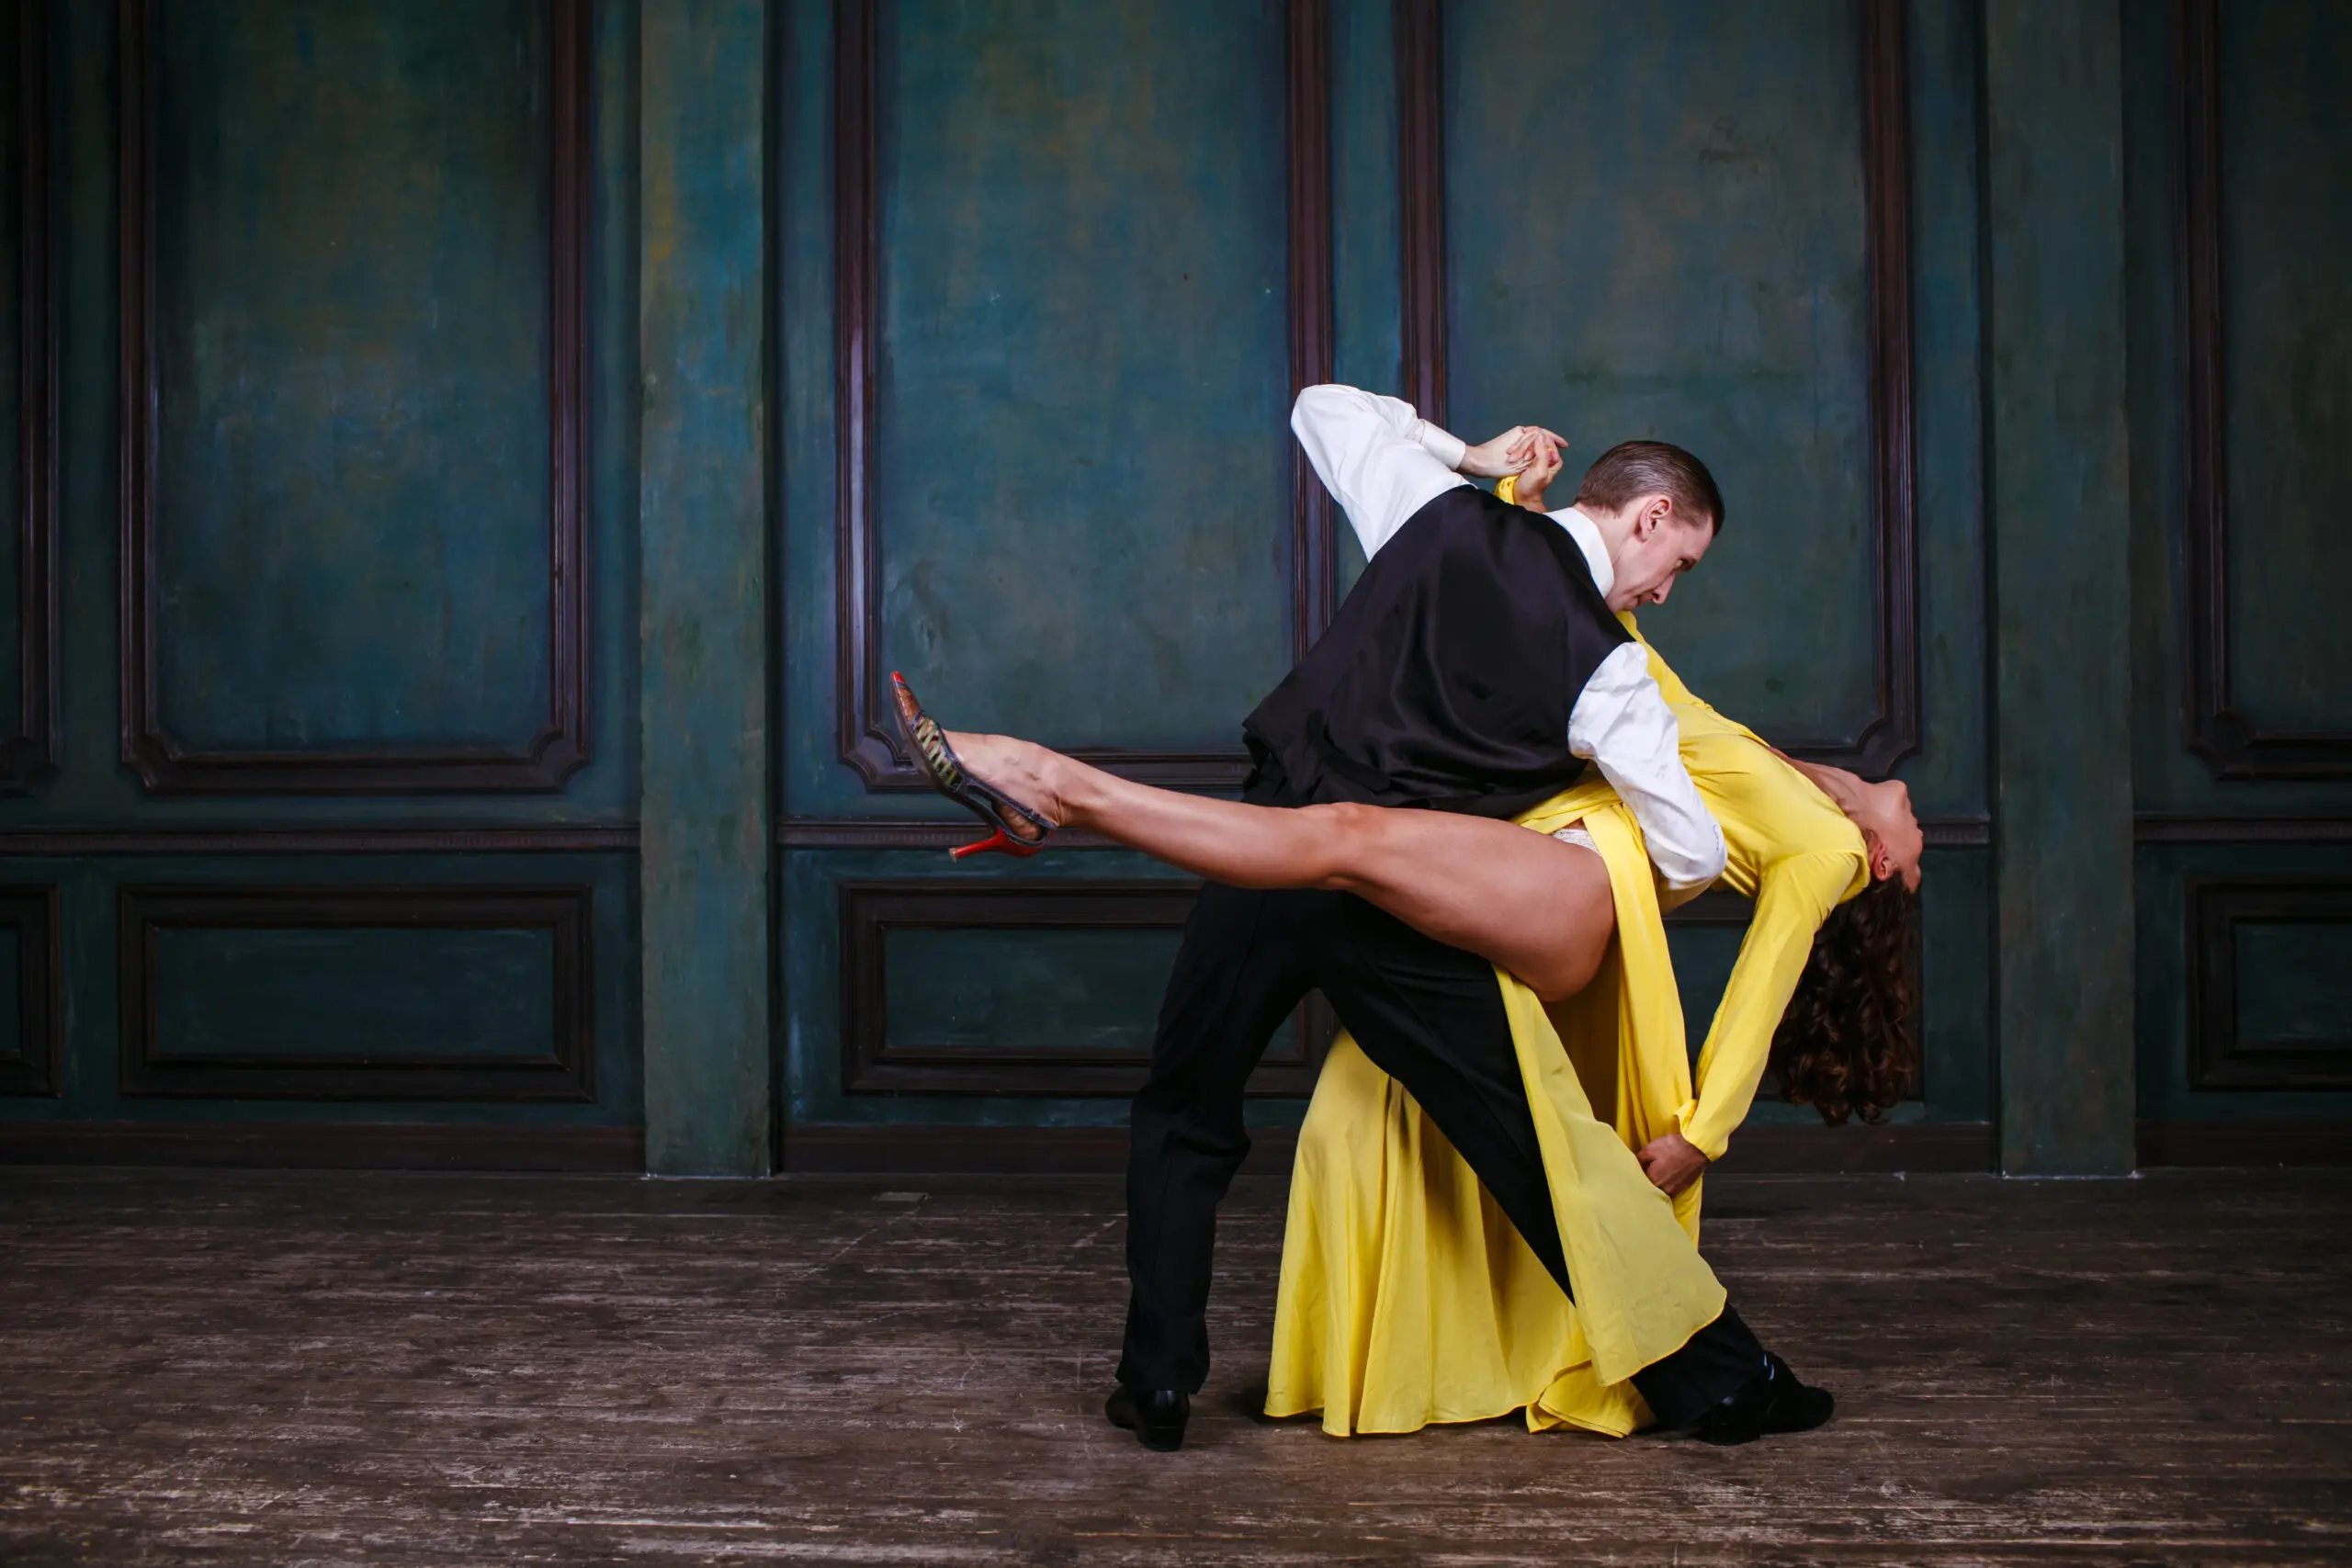 Young Dancers Pose Waltz 5 Stock Photo 11489914 | Shutterstock